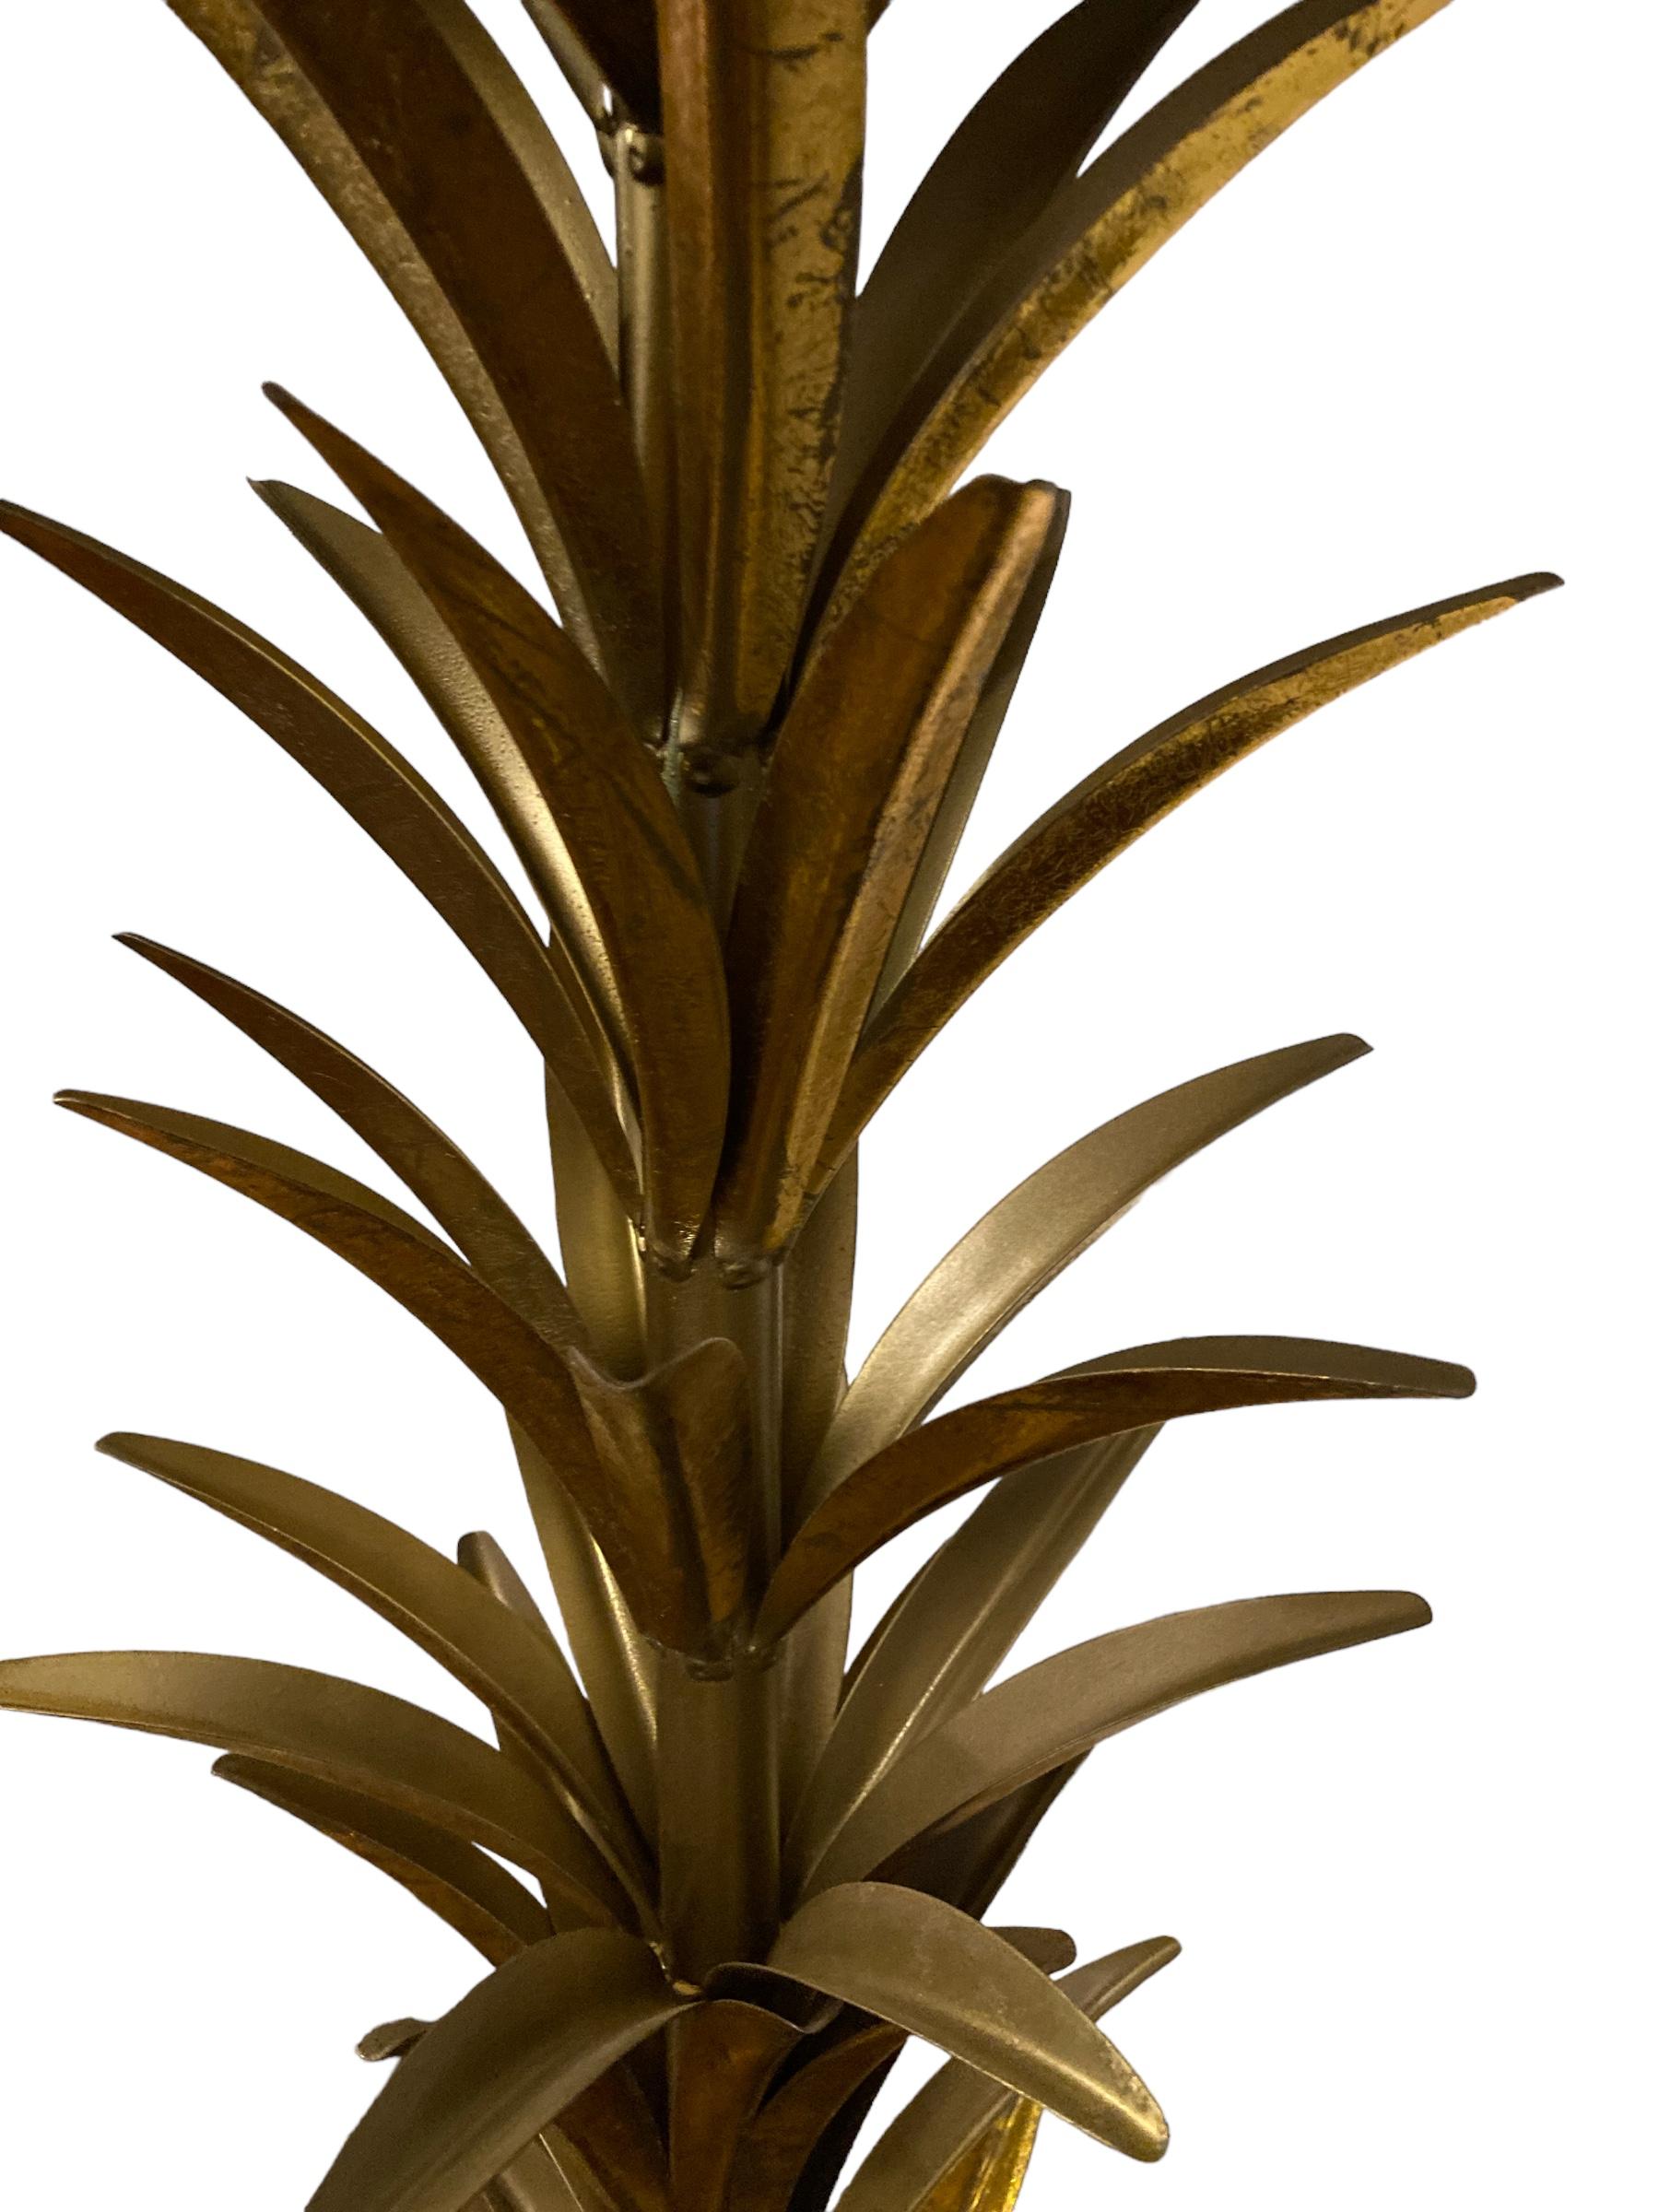 20th Century Hollywood Regency Style Gilt Metal Palm Tree Floor Lamp, Mid to late 20C For Sale